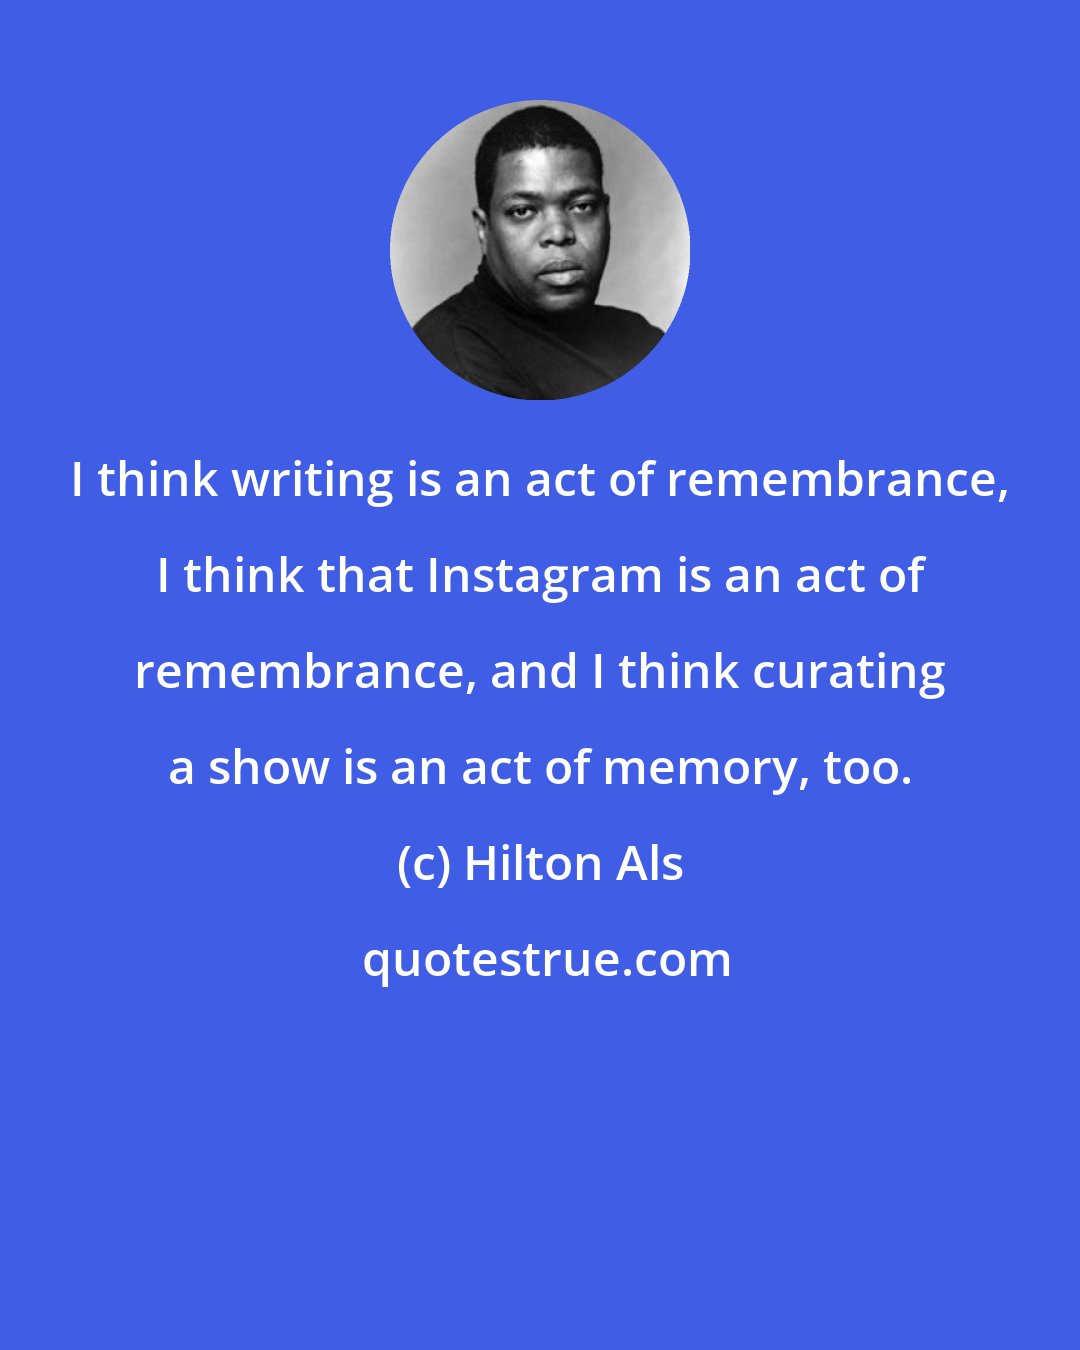 Hilton Als: I think writing is an act of remembrance, I think that Instagram is an act of remembrance, and I think curating a show is an act of memory, too.